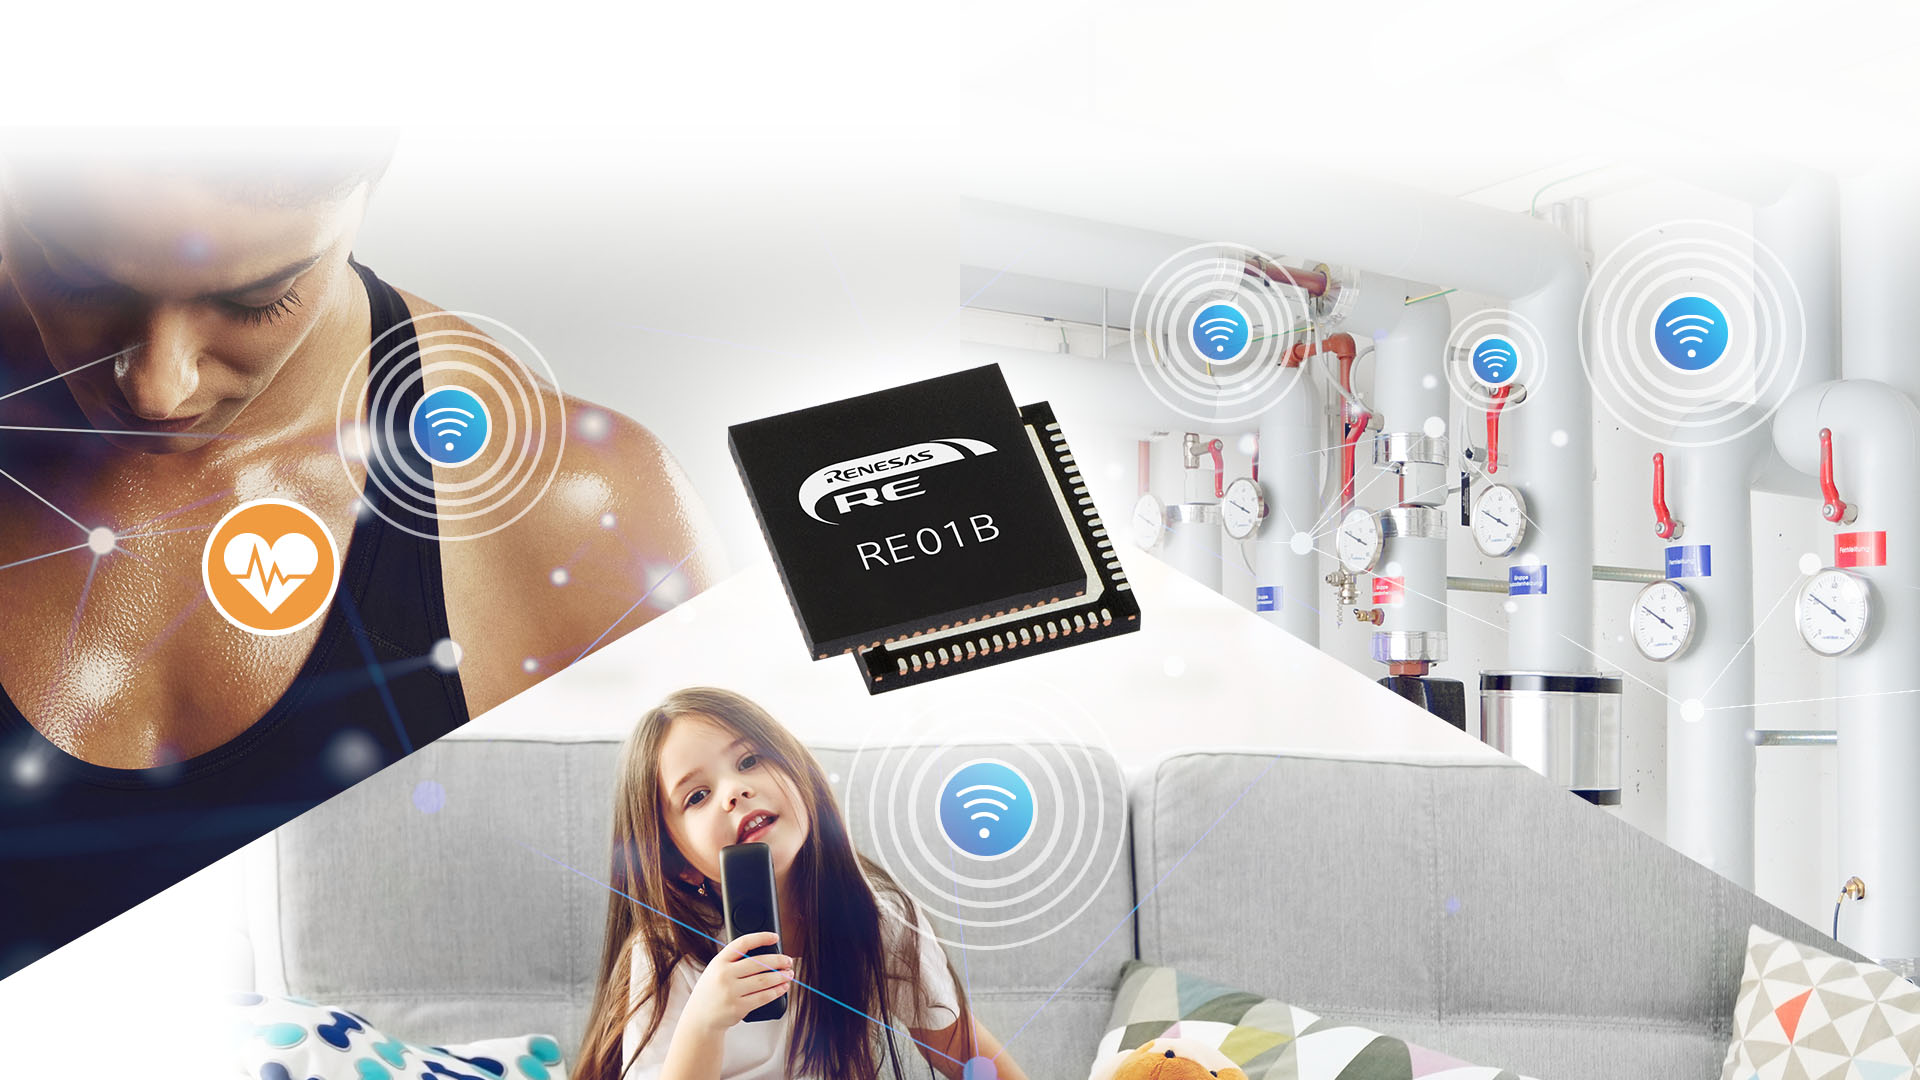 Renesas Adds Bluetooth 5.0 to Ultra-Low Power MCU Family